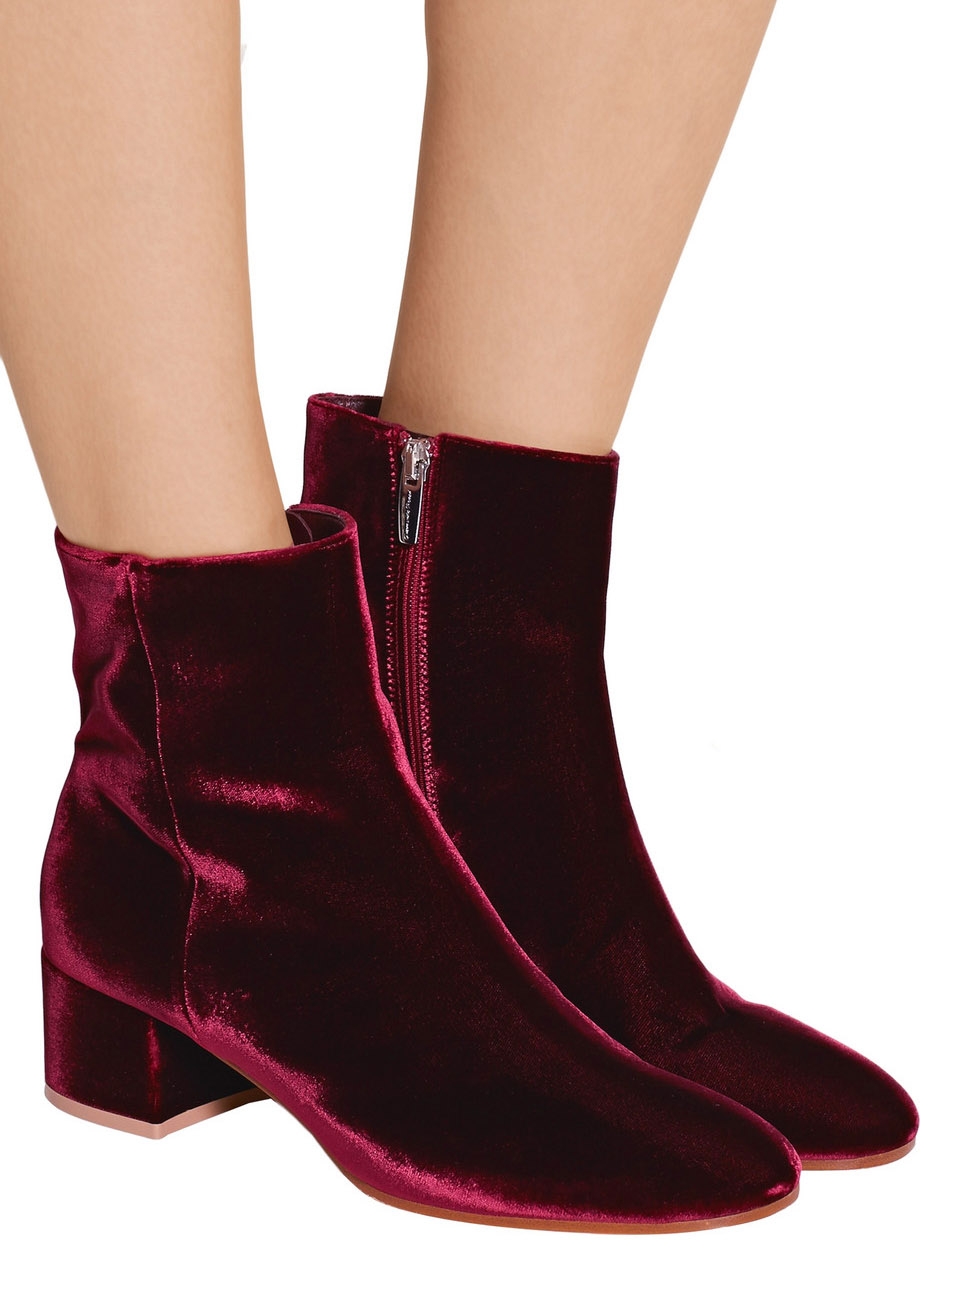 Louise Paris - GIANVITO ROSSI MARGAUX Burgundy red velvet ankle boots ...